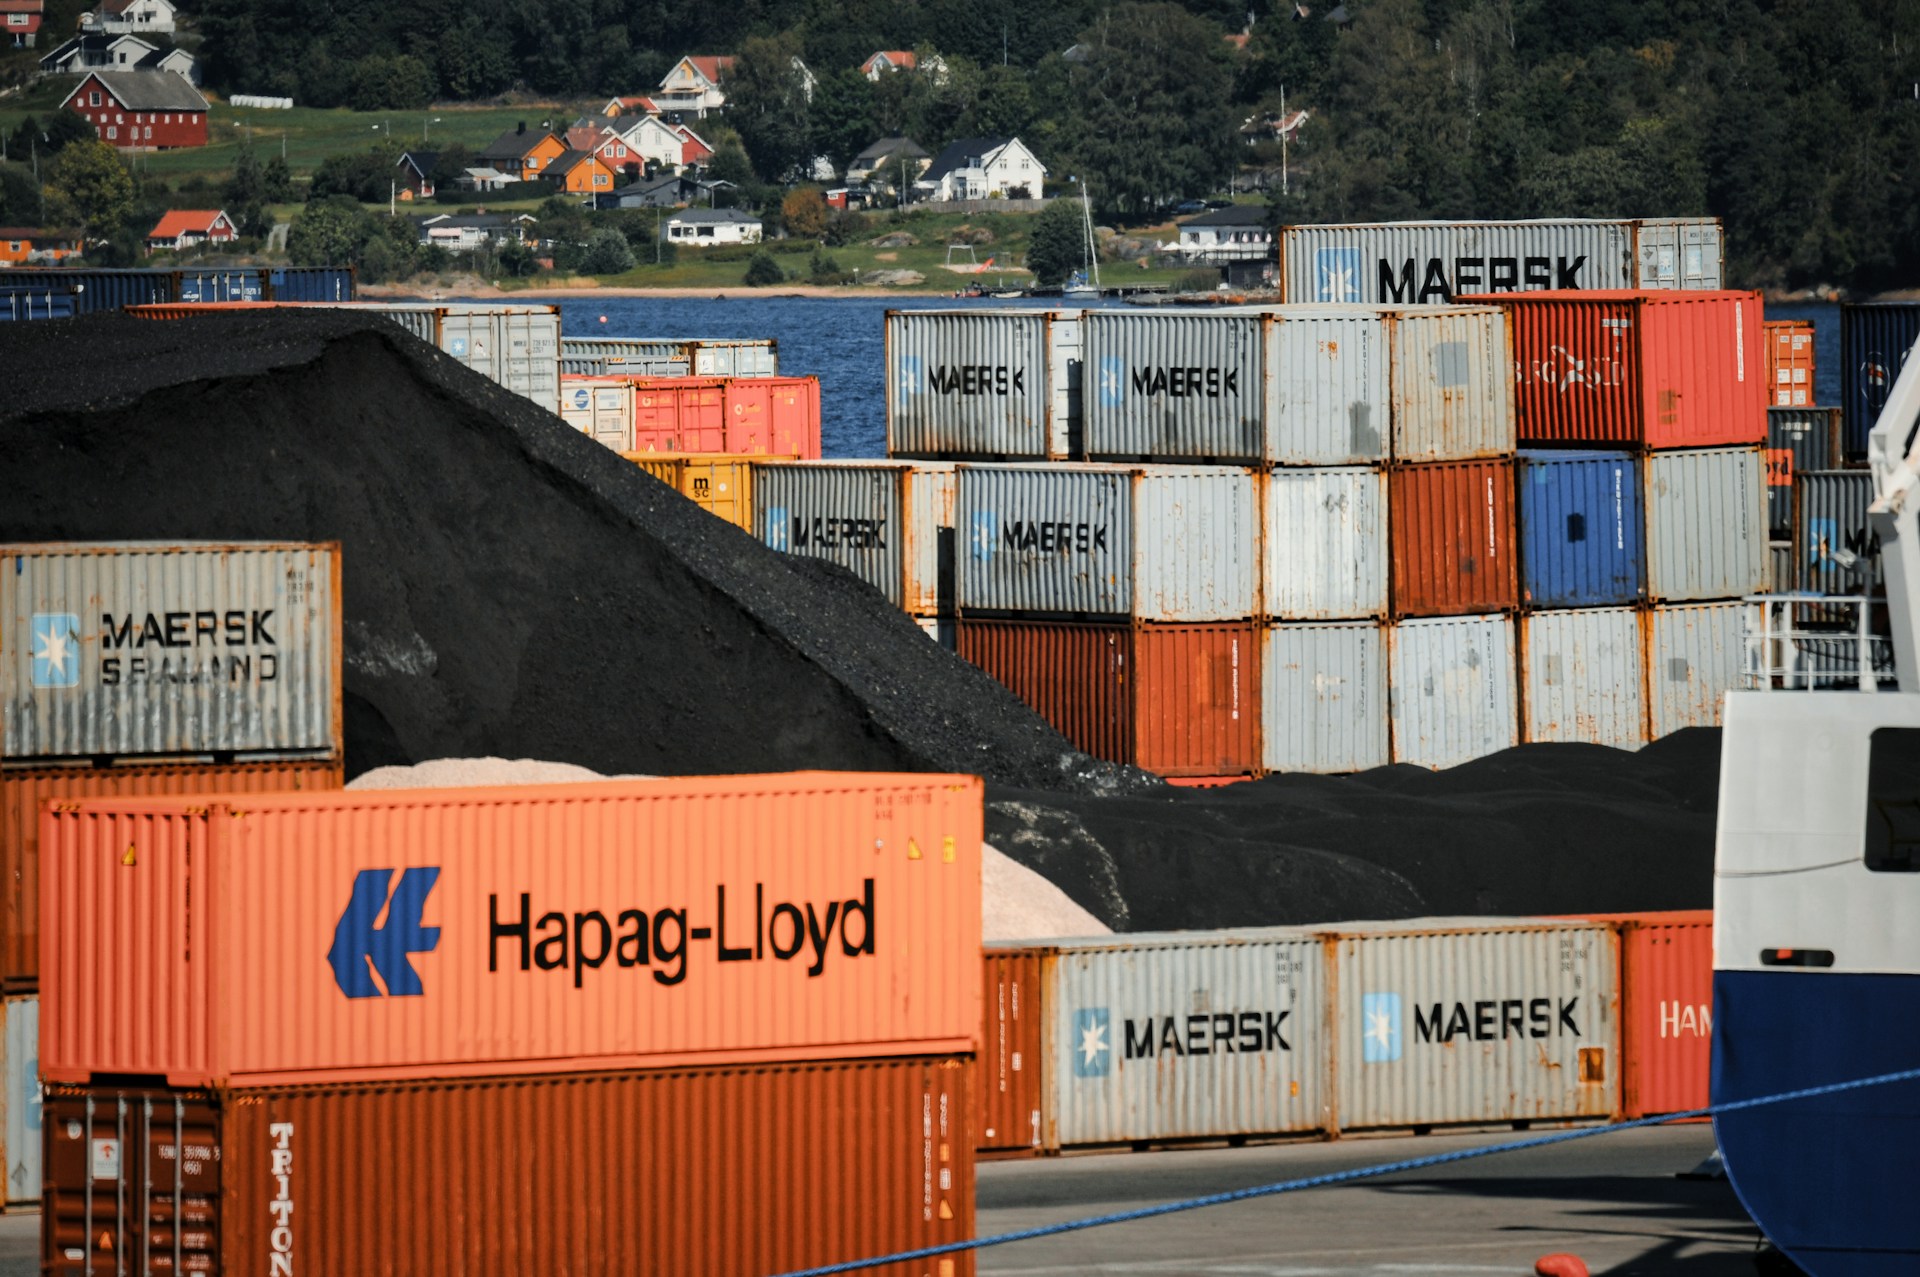 Fleet-Wide Container Tracker Launched by Hapag-Lloyd